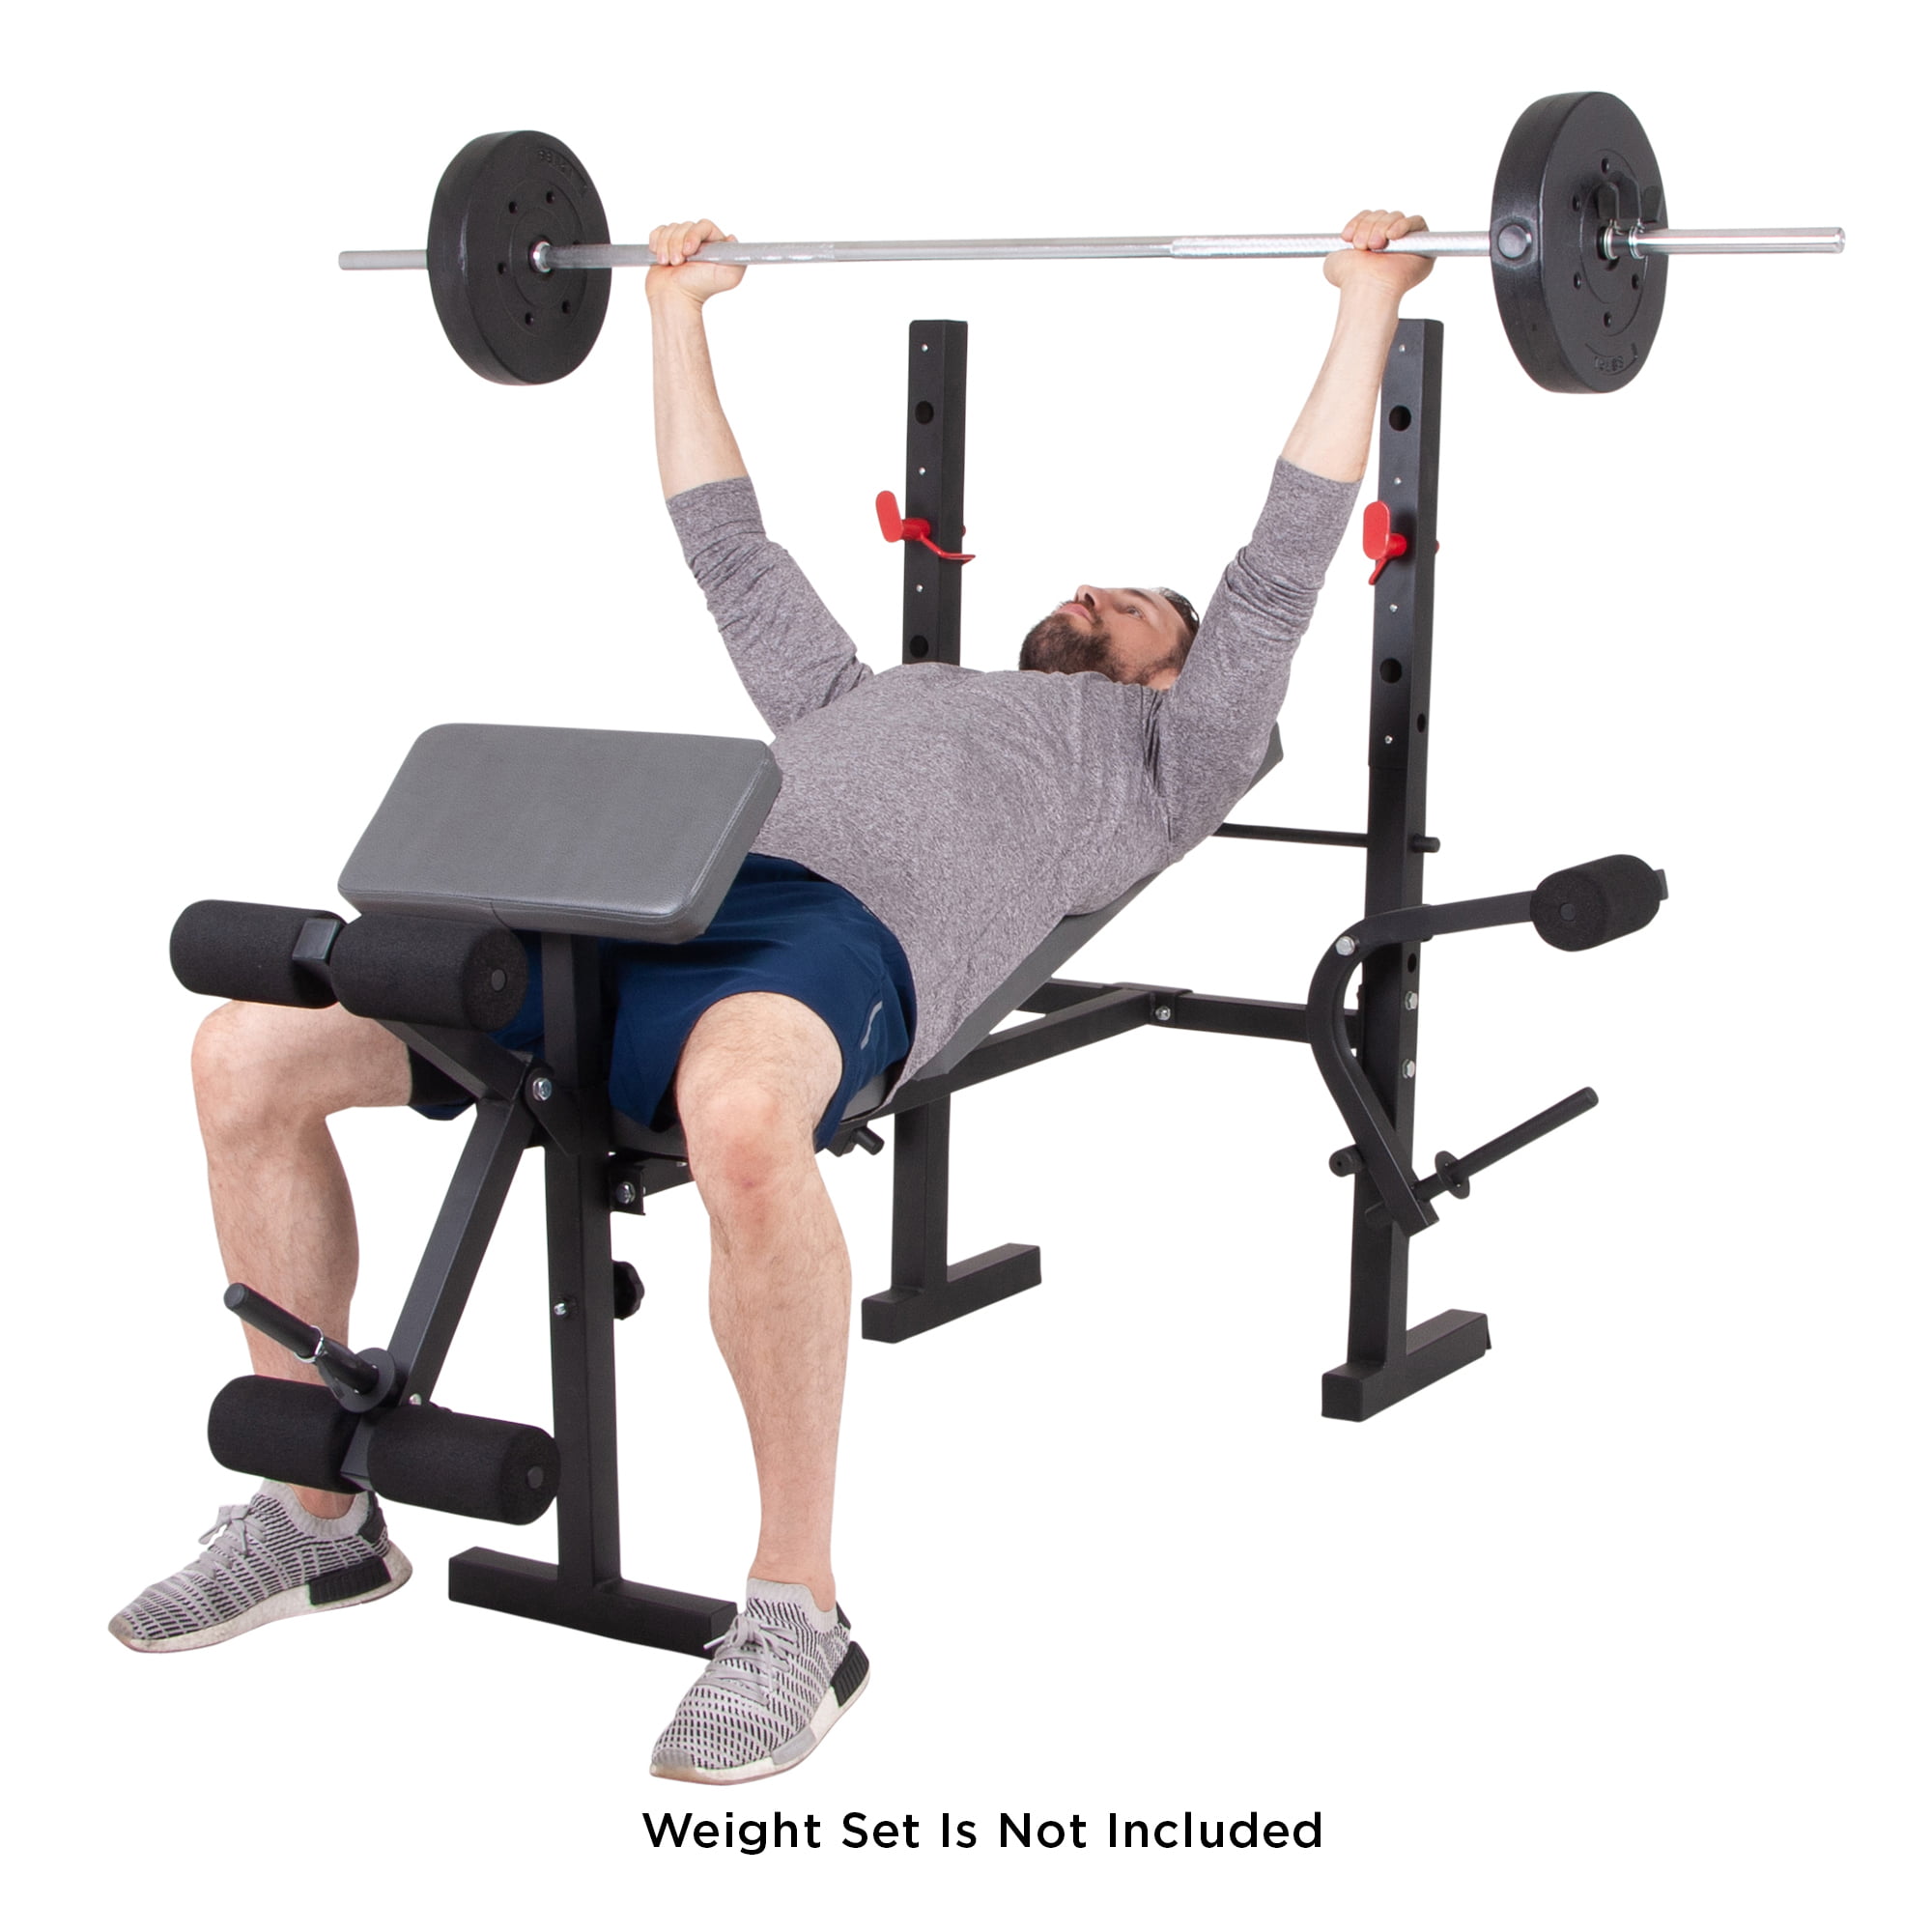 Weight Bench Set Adjustable Home Gym Press Lifting Barbell Exercise Workout USA 